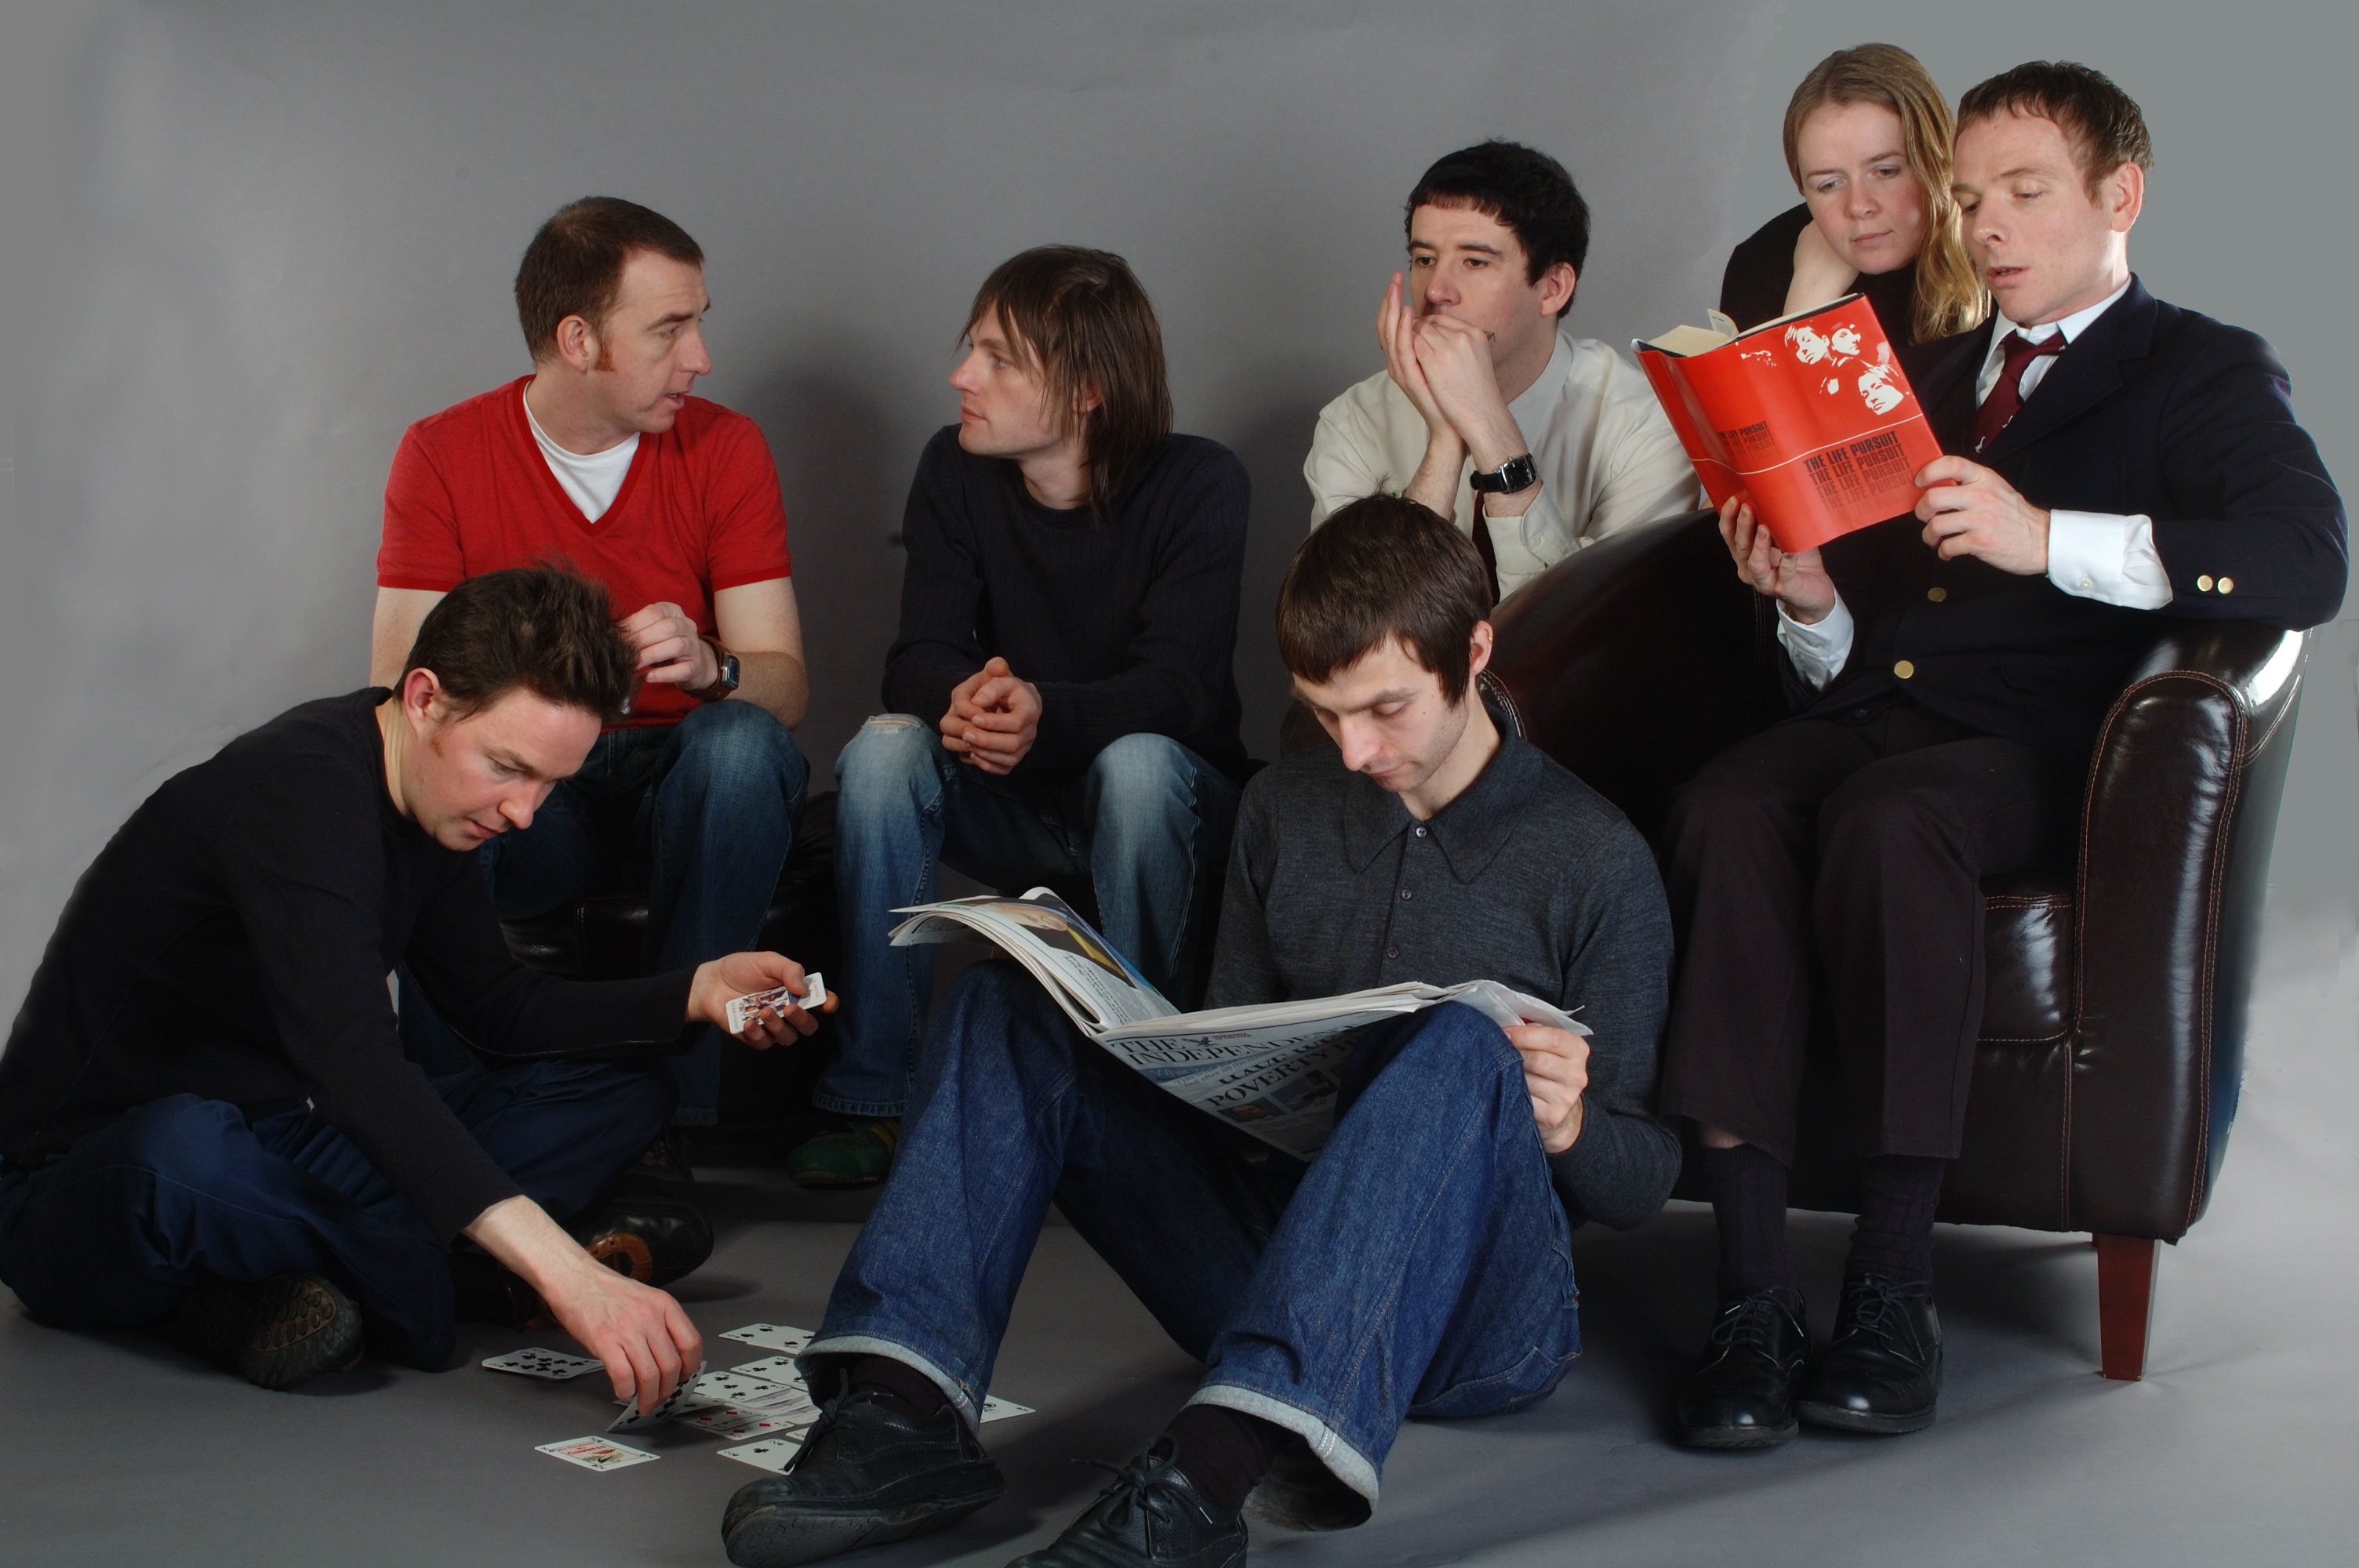 Belle & Sebastian announce new dates, stops include dates in Los Angeles and Chicago.